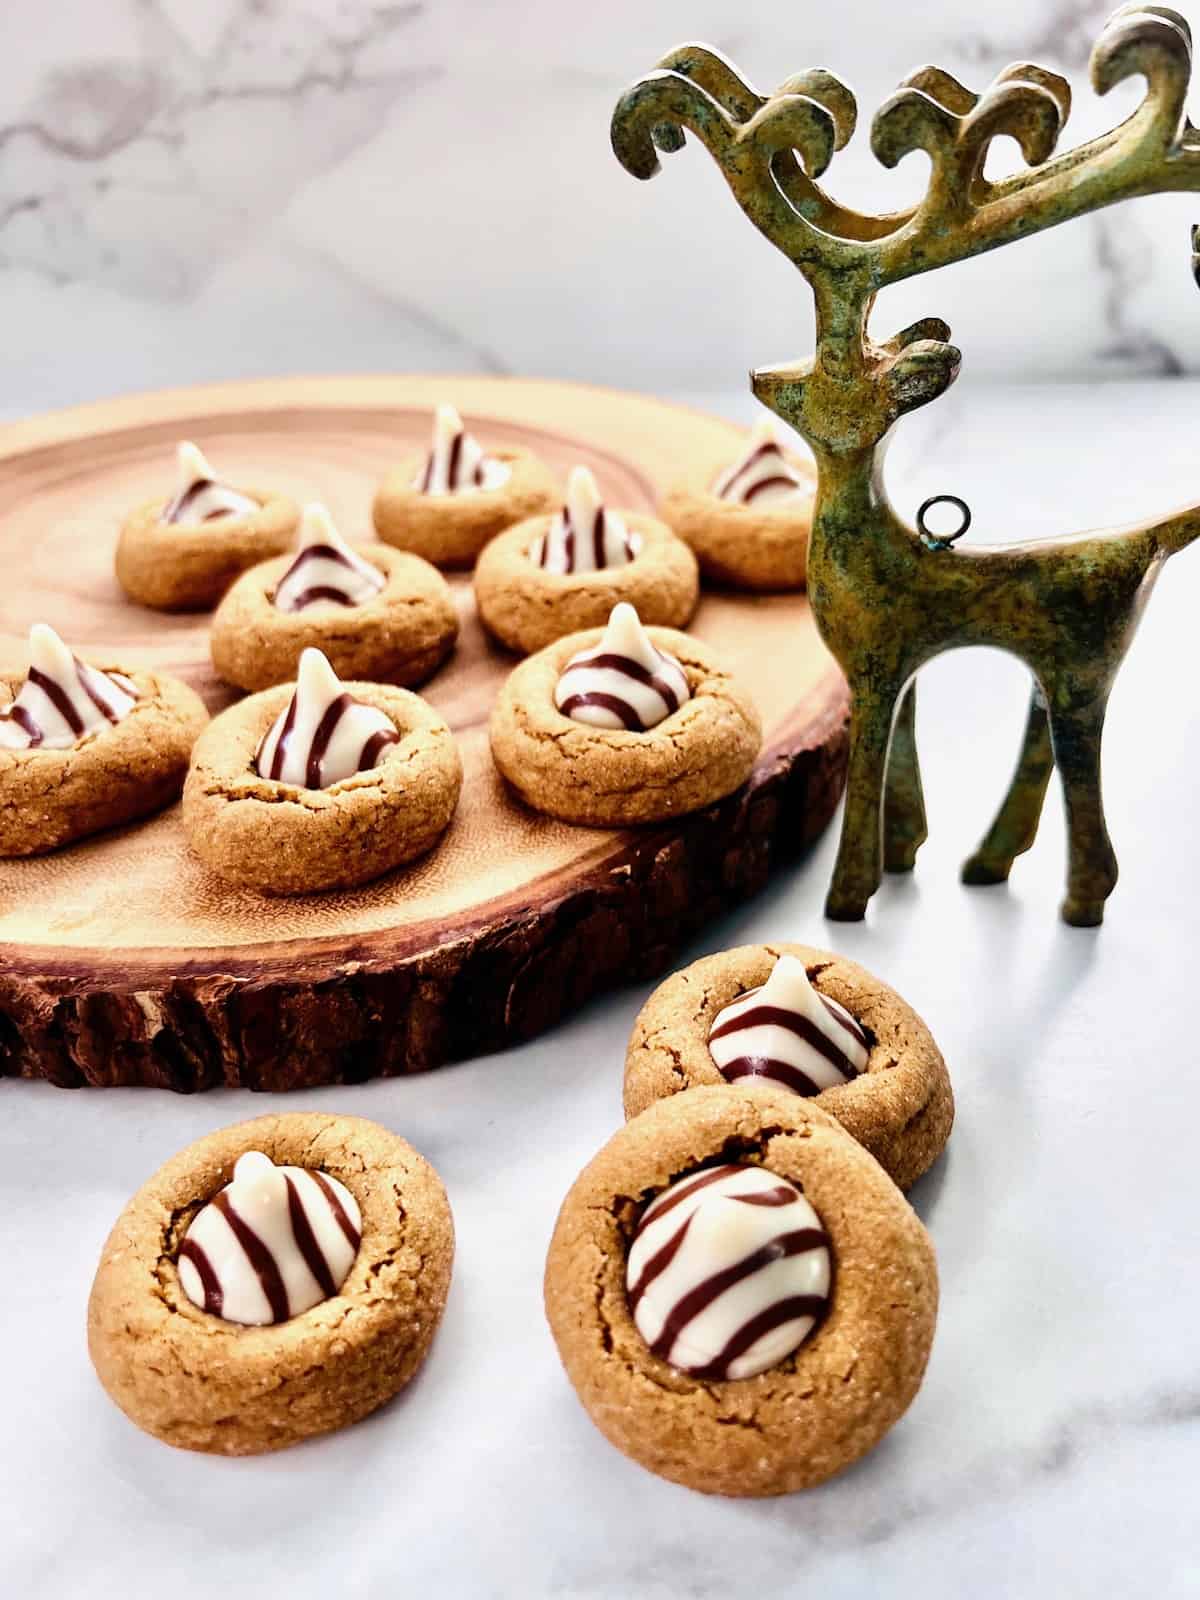 Gingerbread Blossoms with Hershey's Hugs on wood slab and metal reindeer decoration.